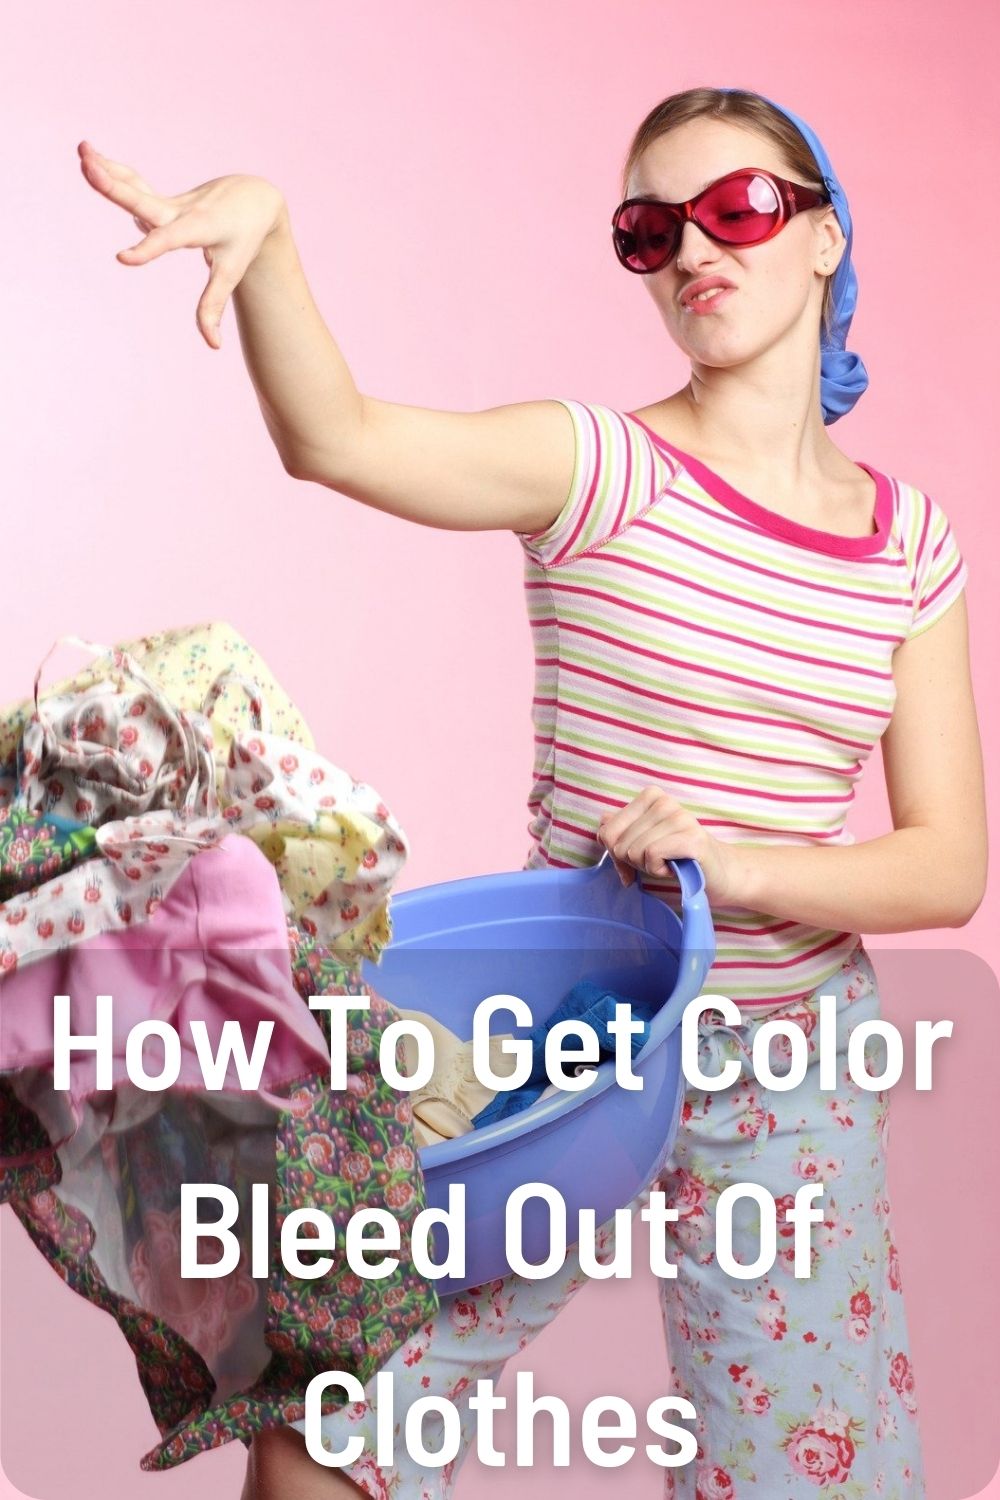 How To Get Color Bleed Out Of Clothes